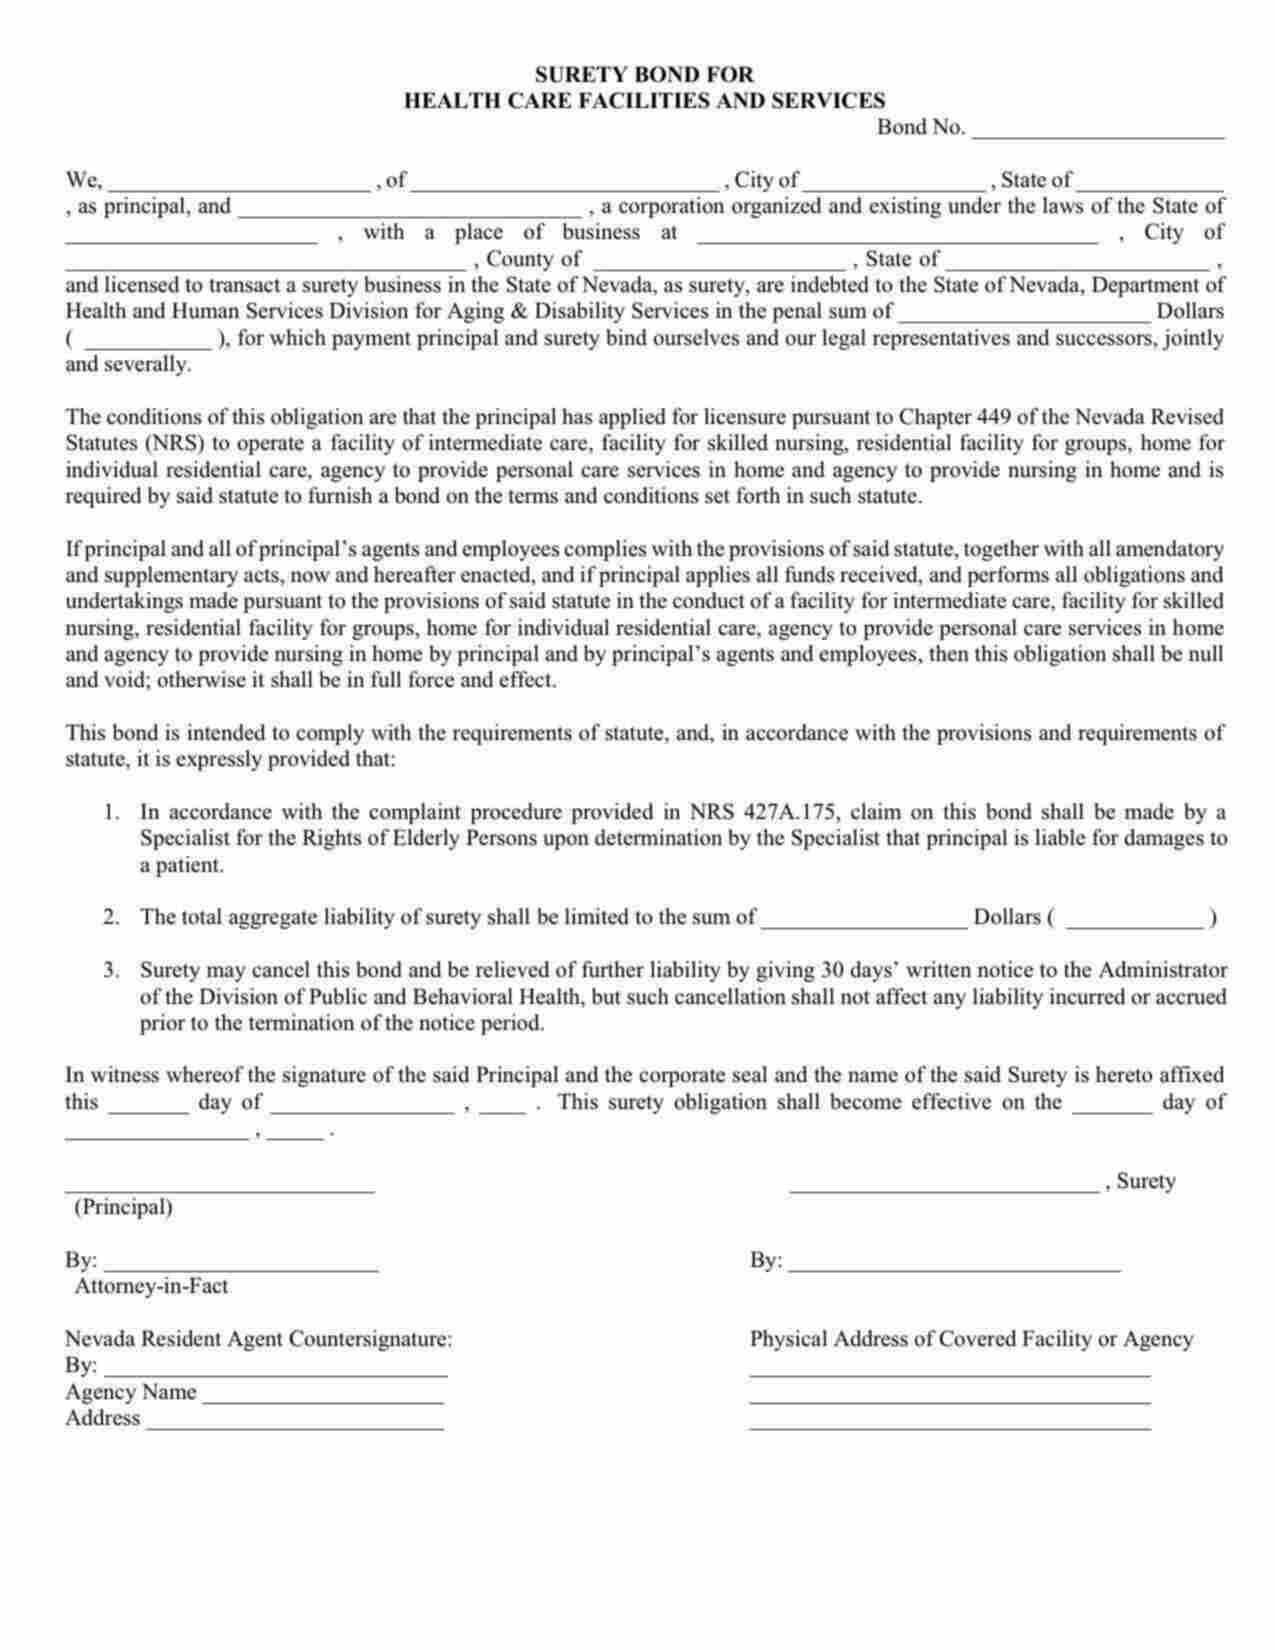 Nevada Health Care Facilities and Services Bond Form